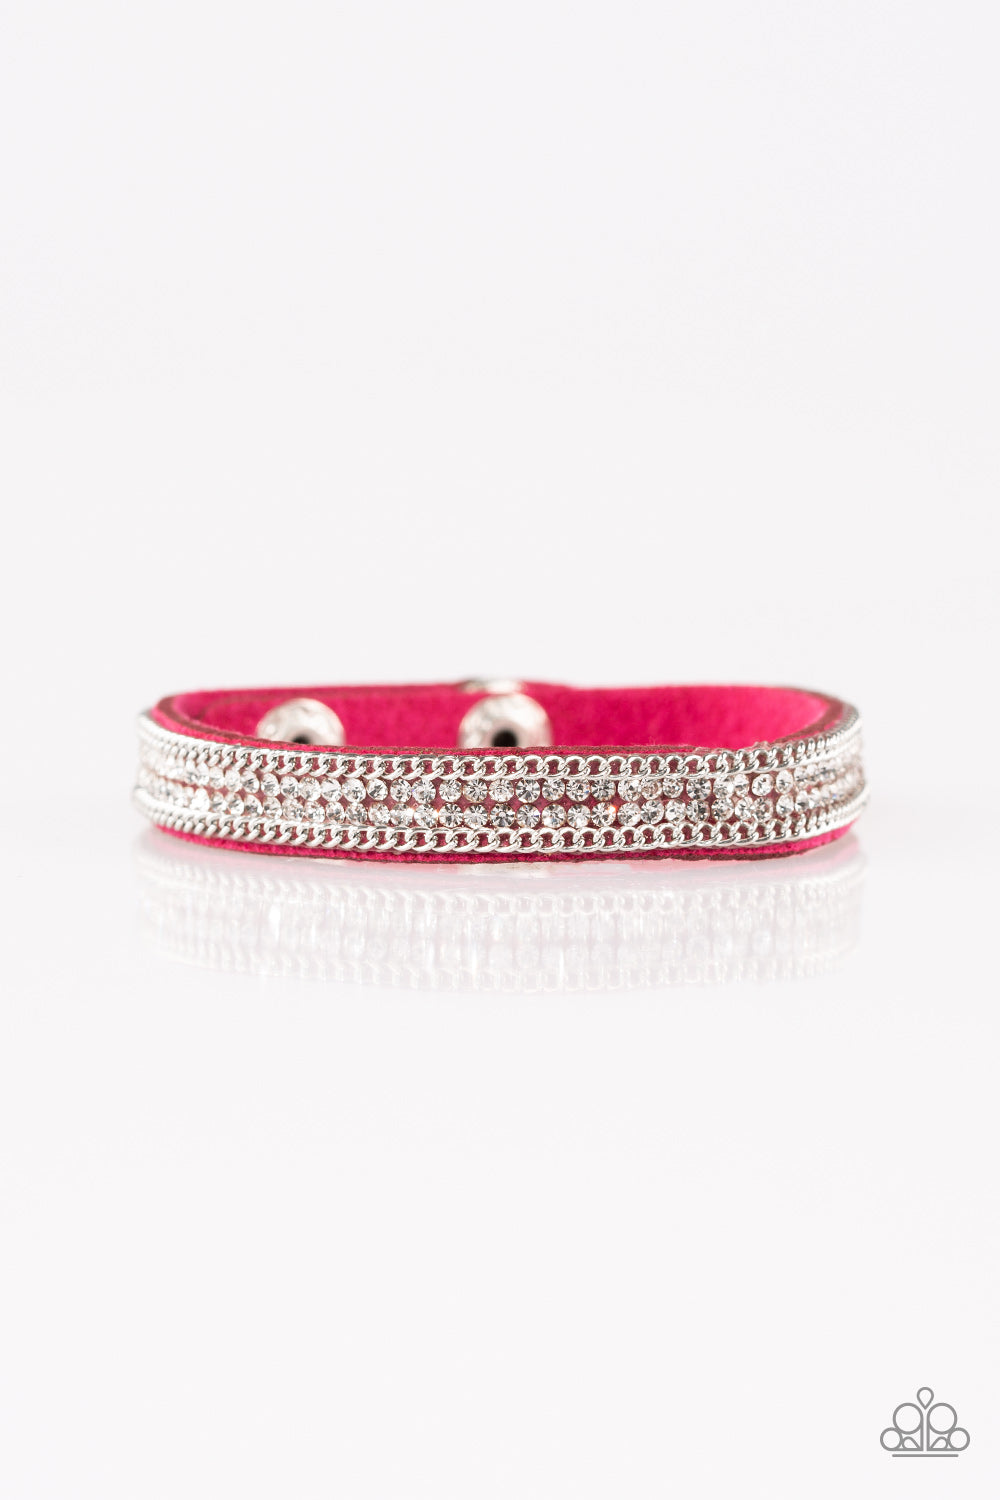 five-dollar-jewelry-babe-bling-pink-bracelet-paparazzi-accessories